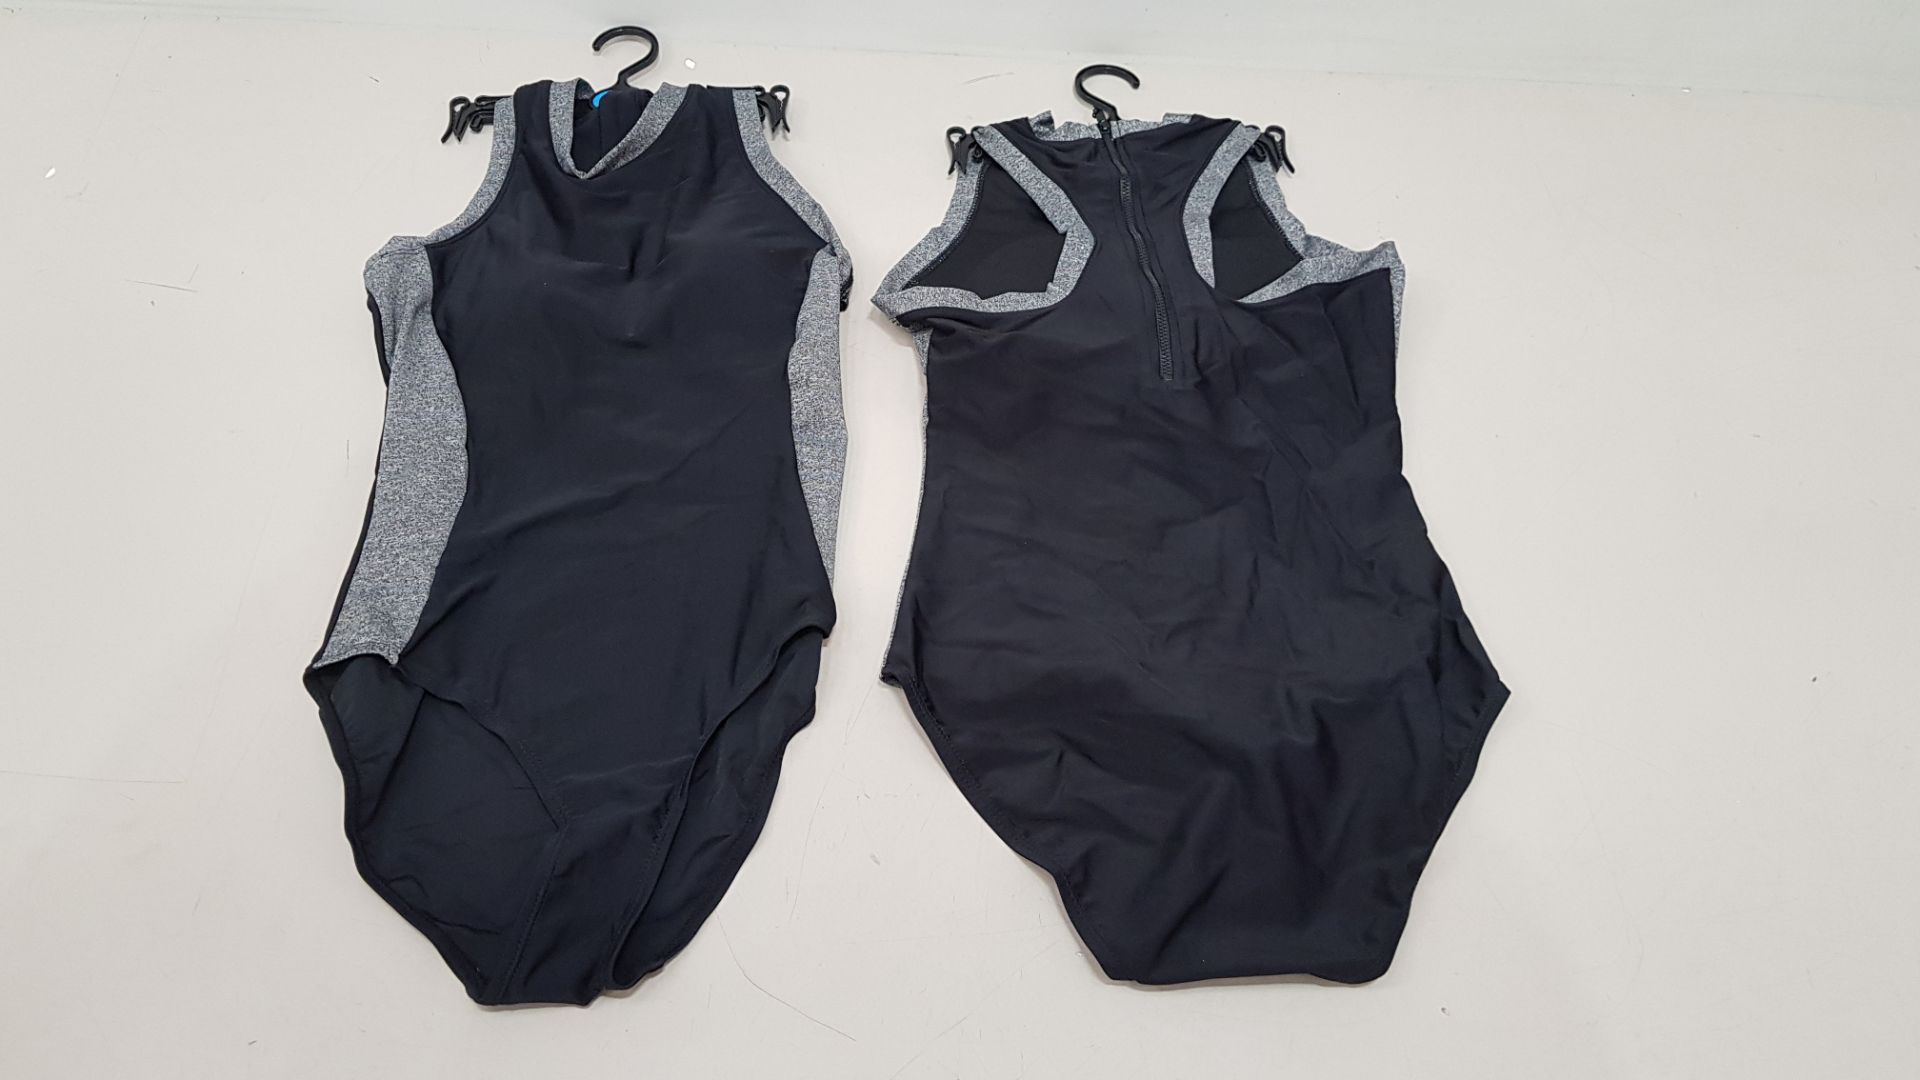 50 X BRAND NEW WORKOUT 1 PIECE SWIMSUITS ZIP UP BACK - IN BLACK AND GREY - IN SIZE UK 12